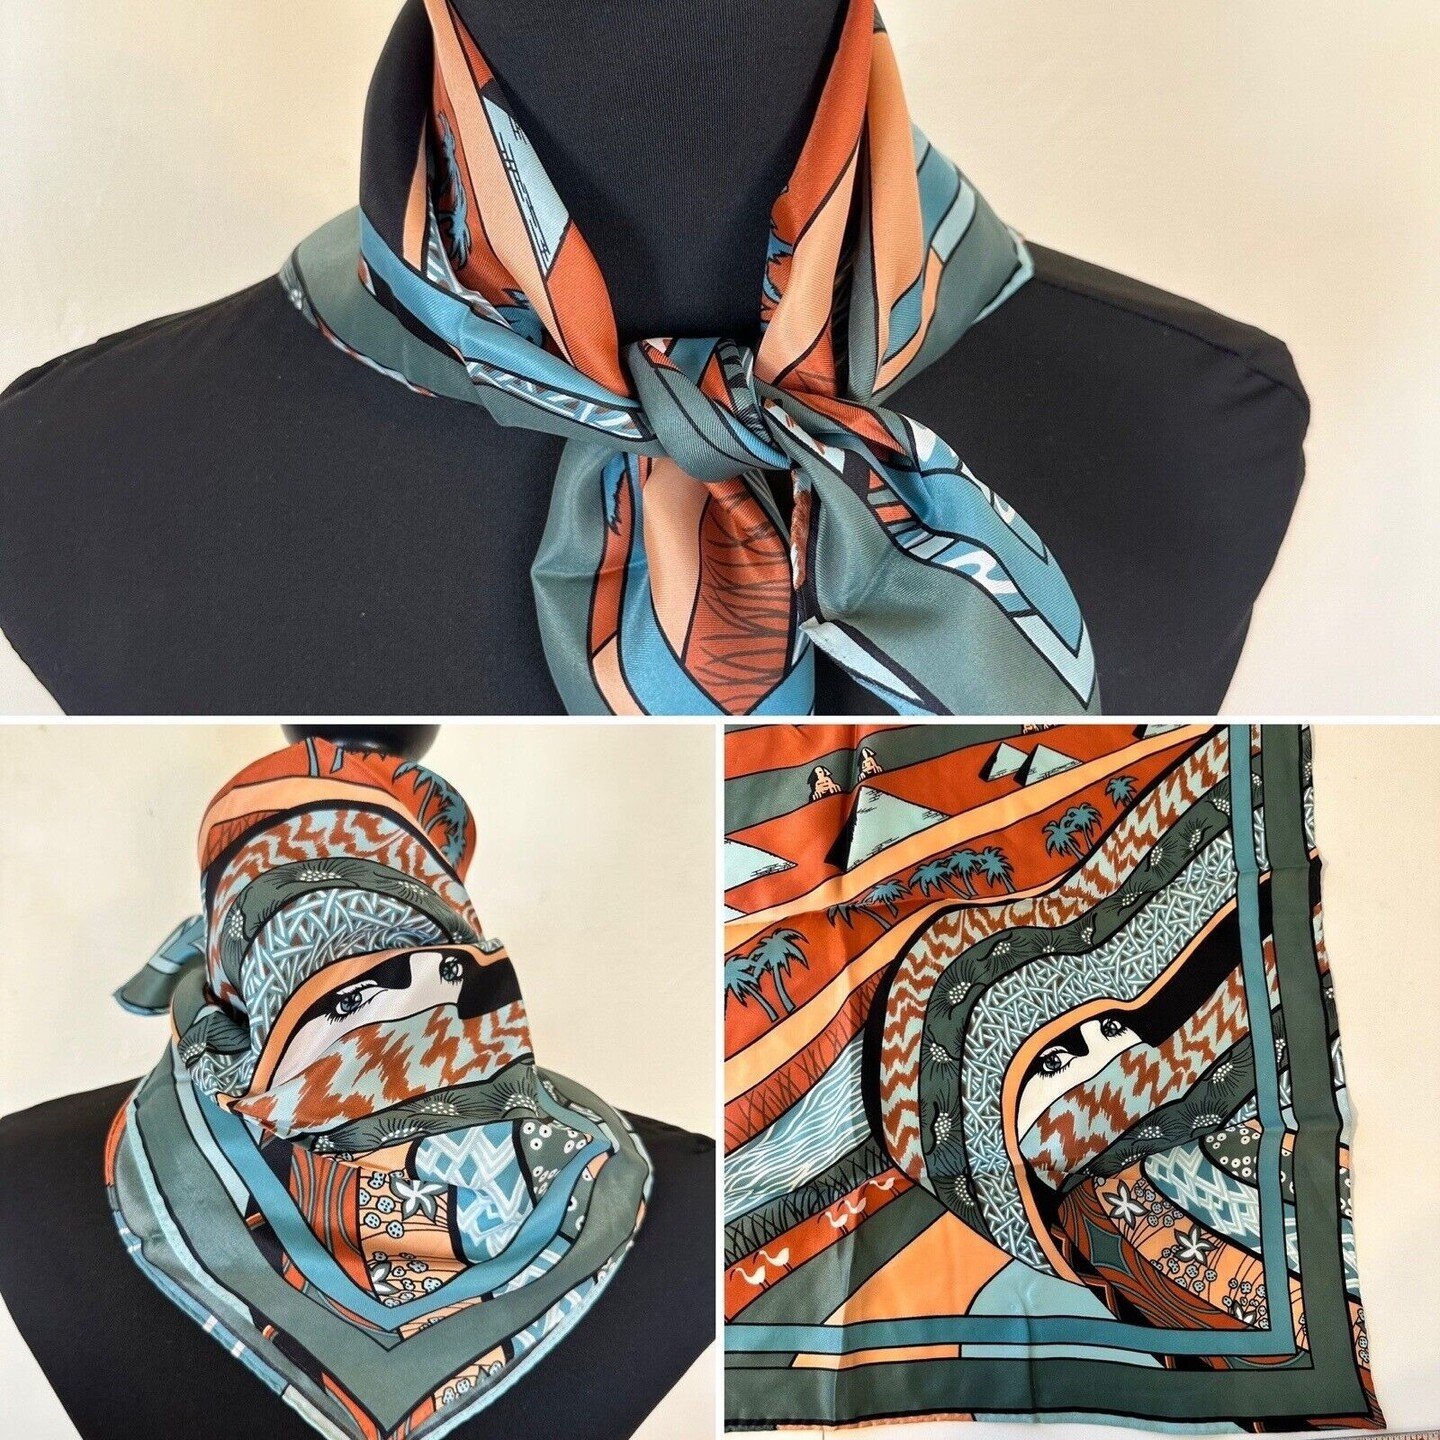 Vintage 20 Inch Square Women's Poly Scarf, Green and Brown, Egyptian Female Face
$14.99

I love this scarf. The patterns and female face are enchanting. No branding. I see no imperfections. good condition. 20&quot; square.

#womensscarf 
#vintagescar